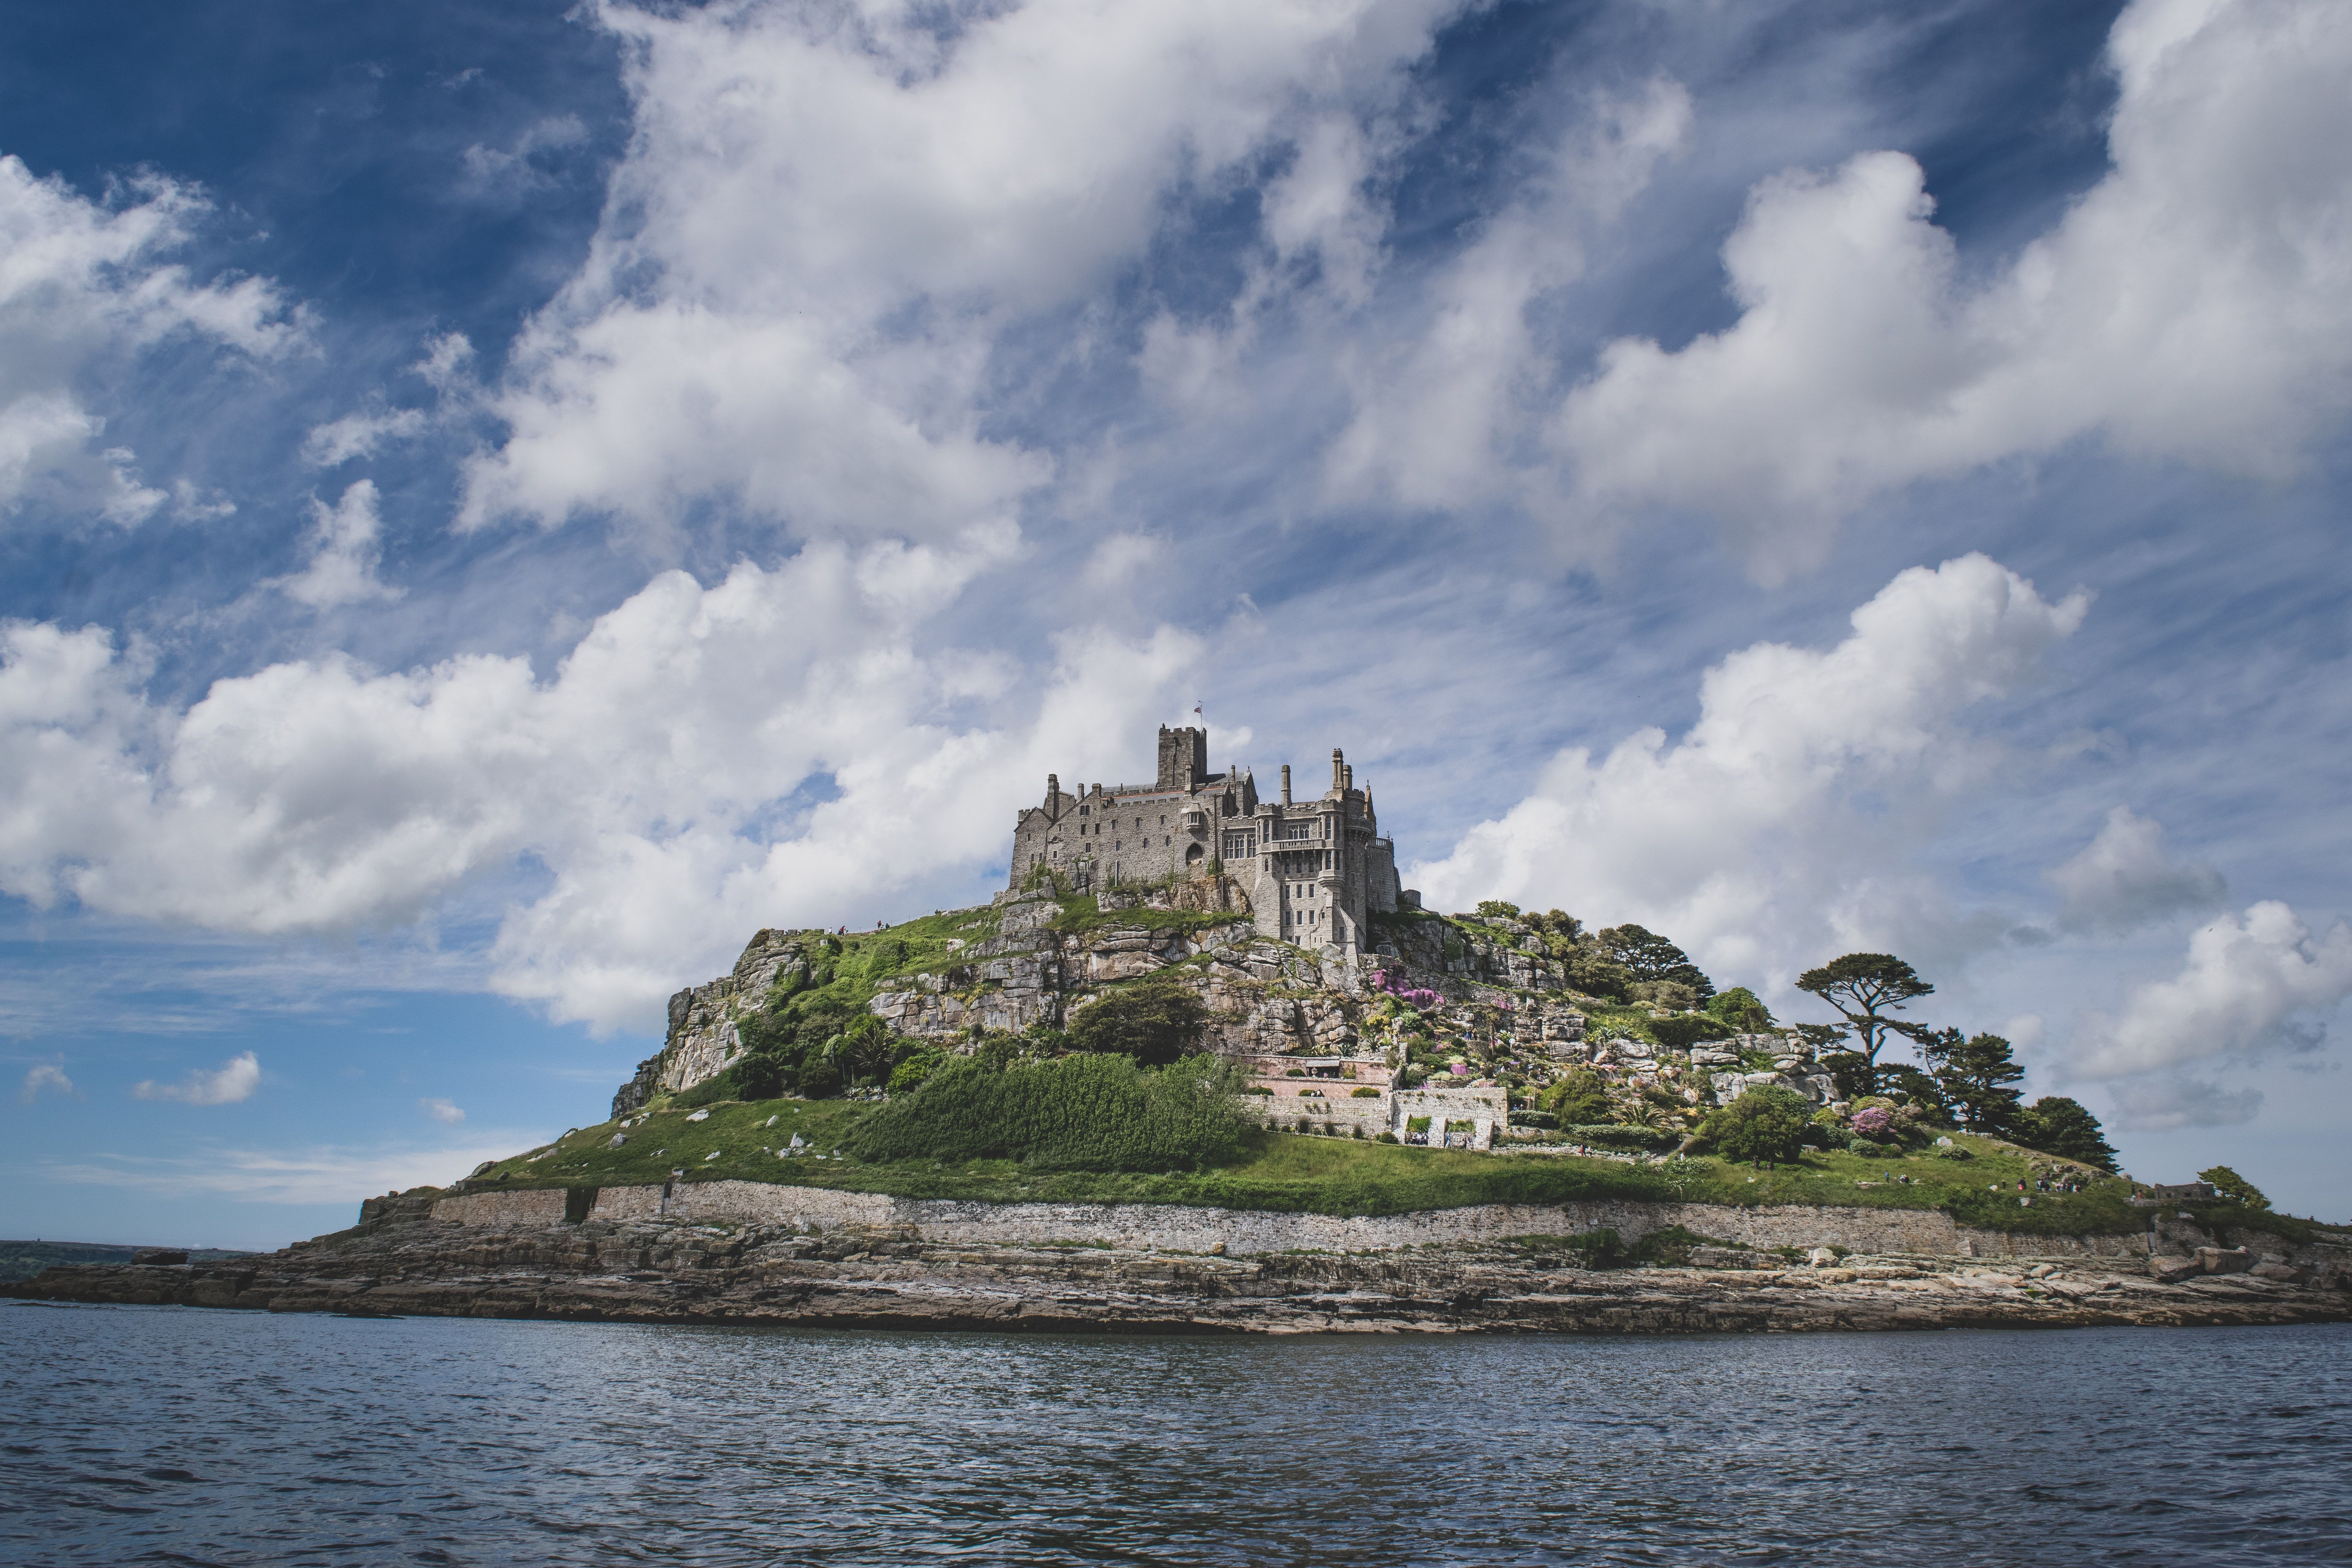 Visitors can access St. Michaels Mount by boat or on foot.